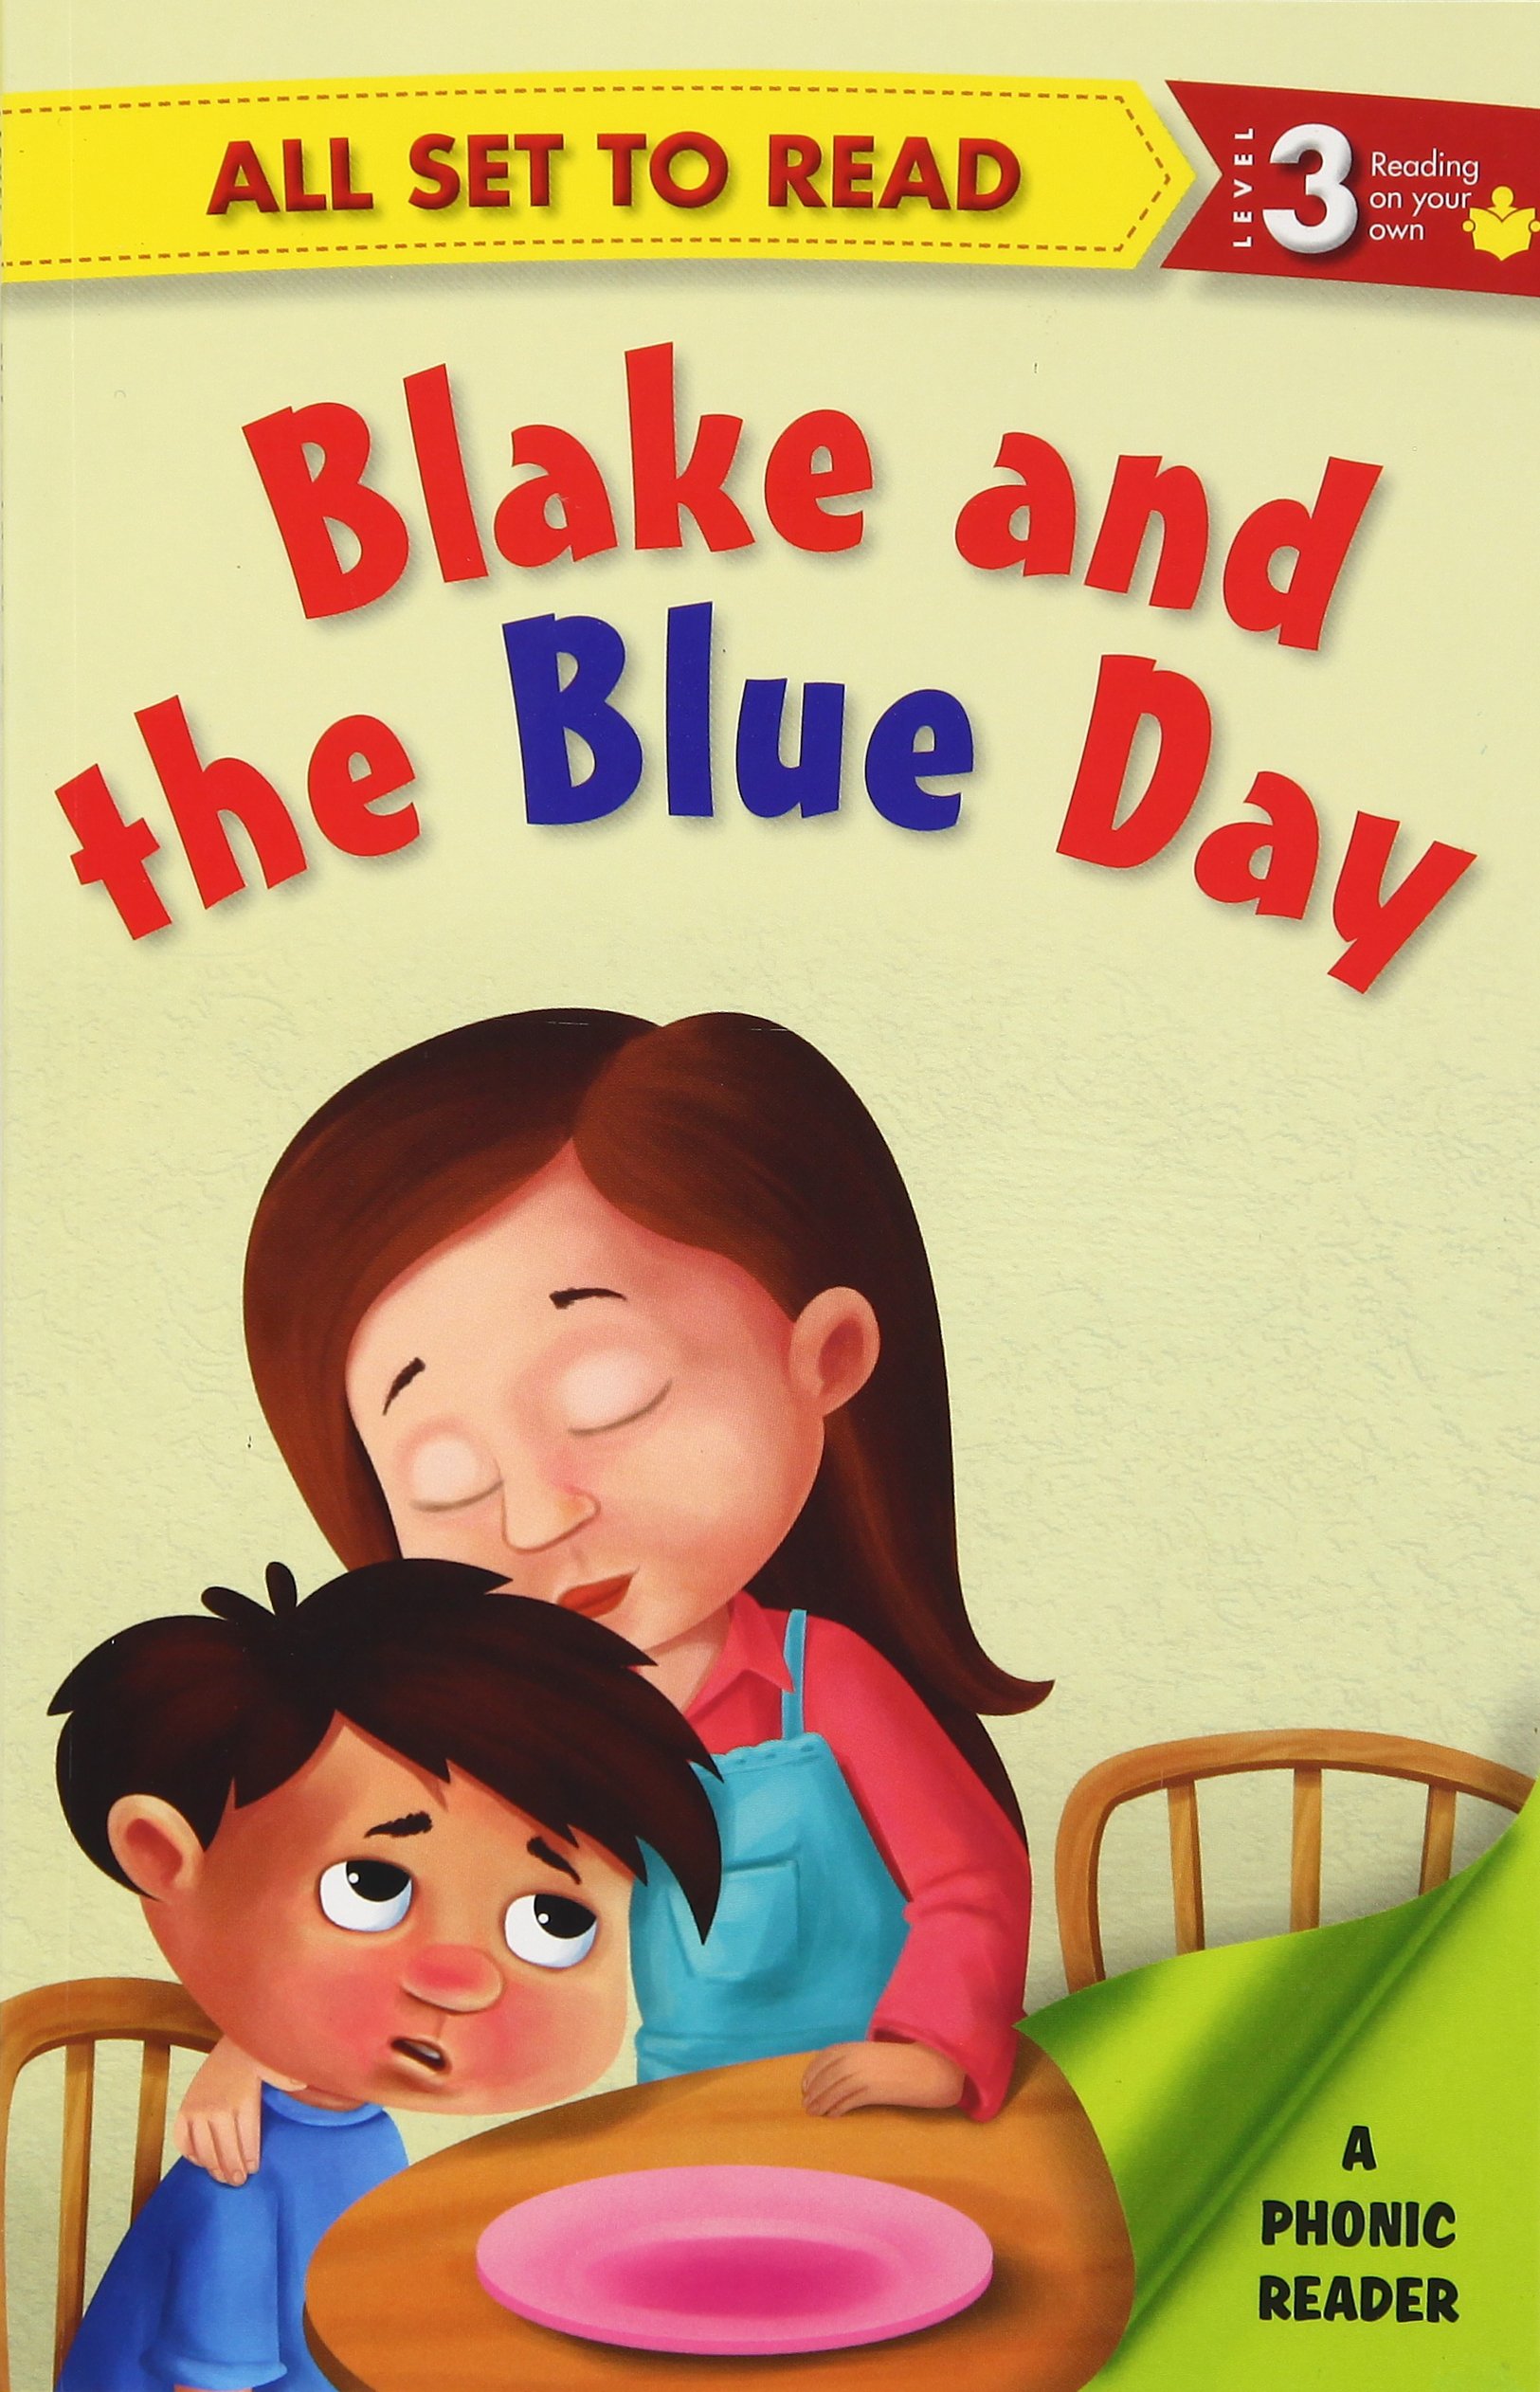 All Set To Read: A Phonic Reader - LEVEL 3 -Reading on your own : BLAKE AND THE BLUE DAY